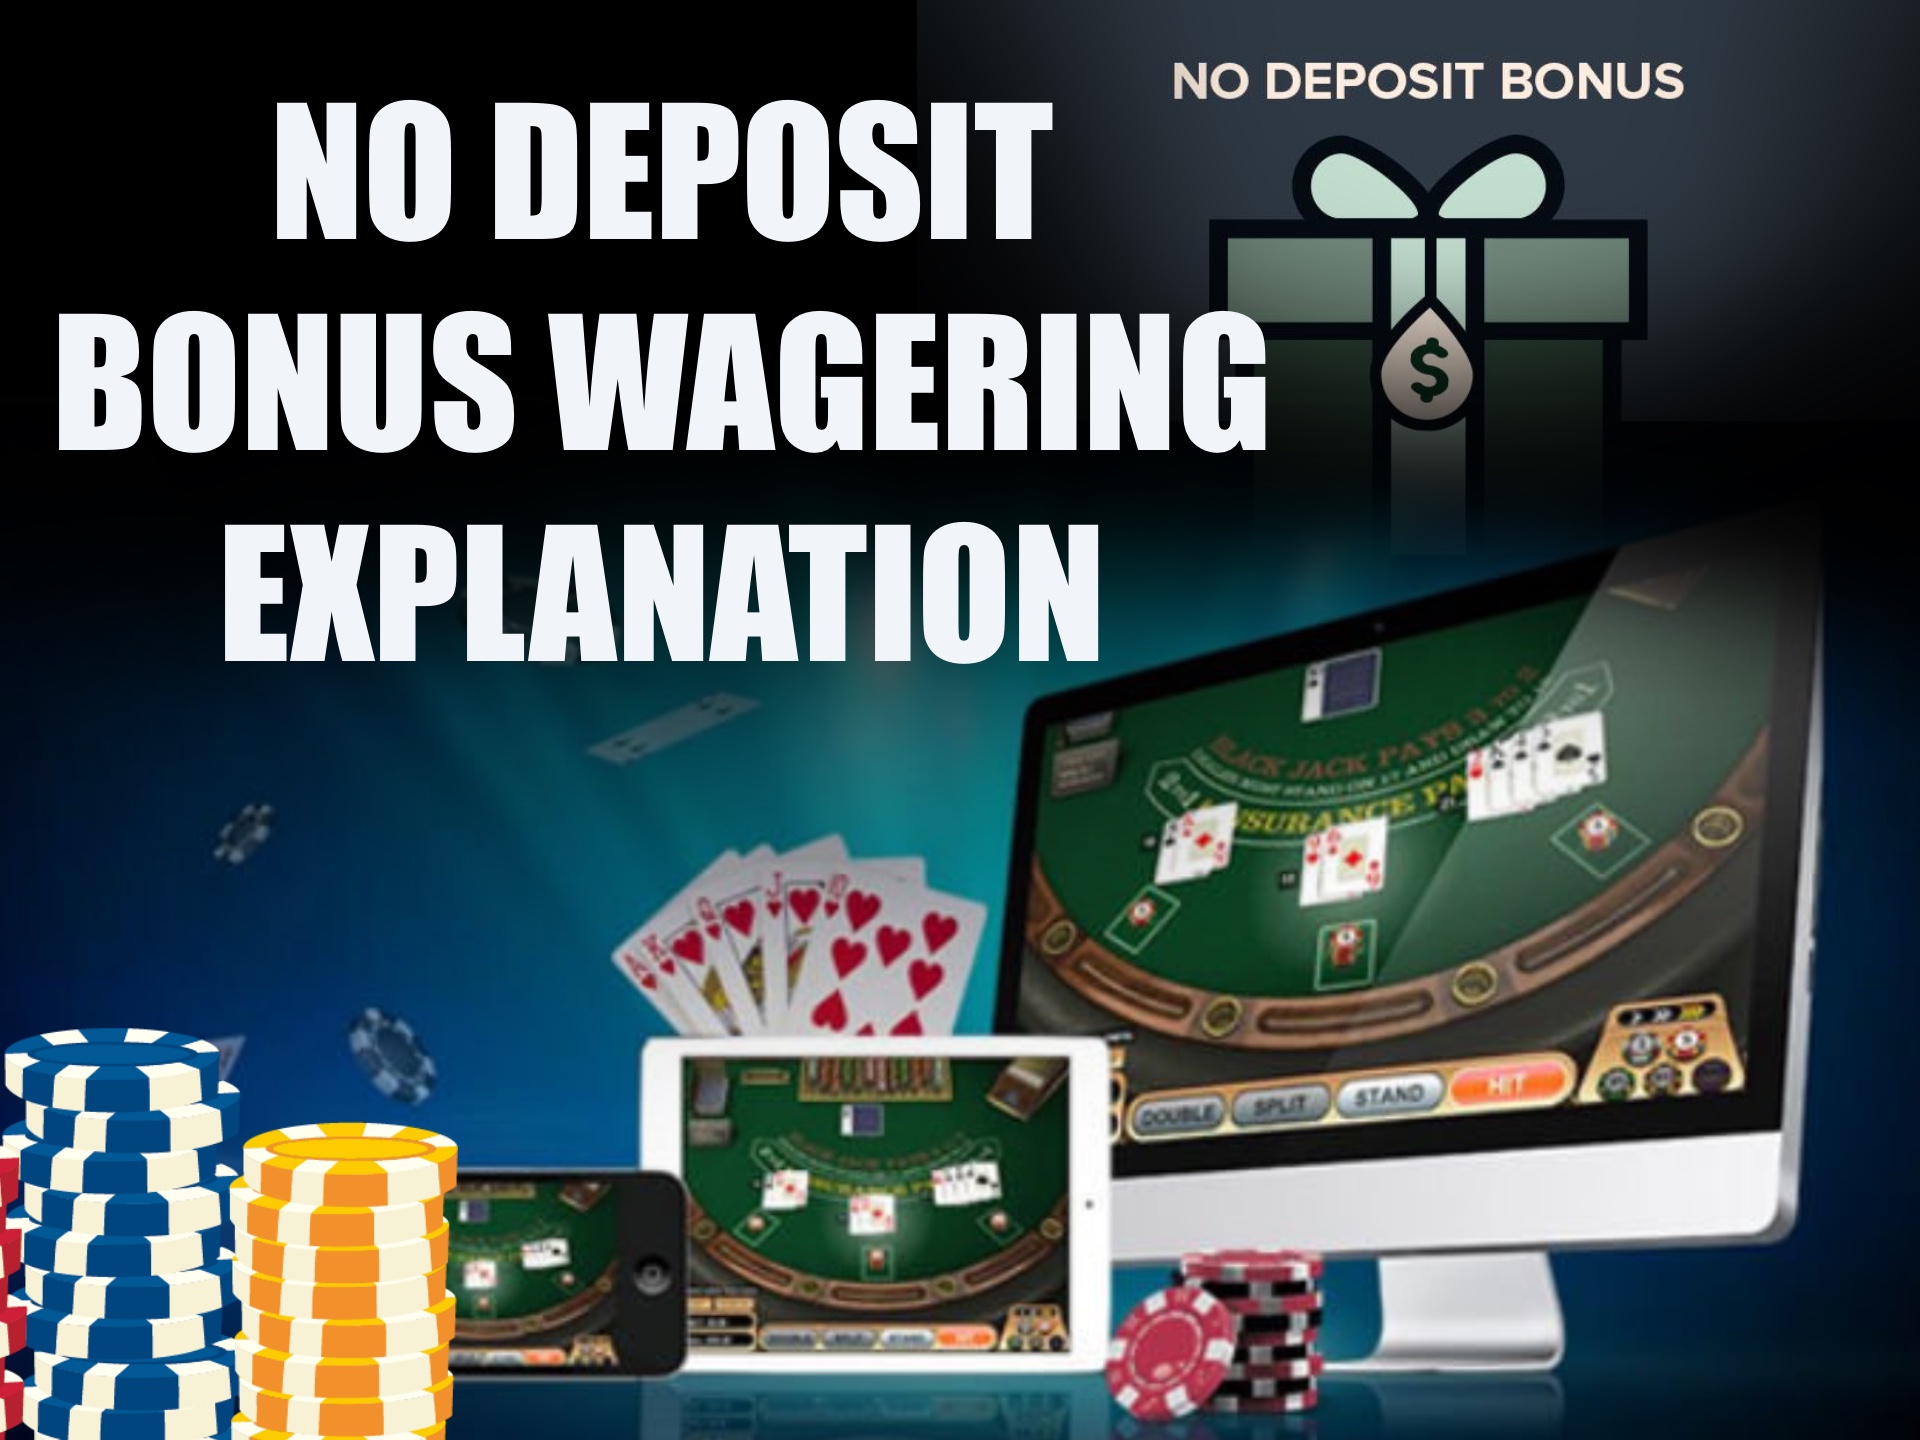 Be sure, that you've met all the wagering conditions before withdrawing a no deposit bonus.